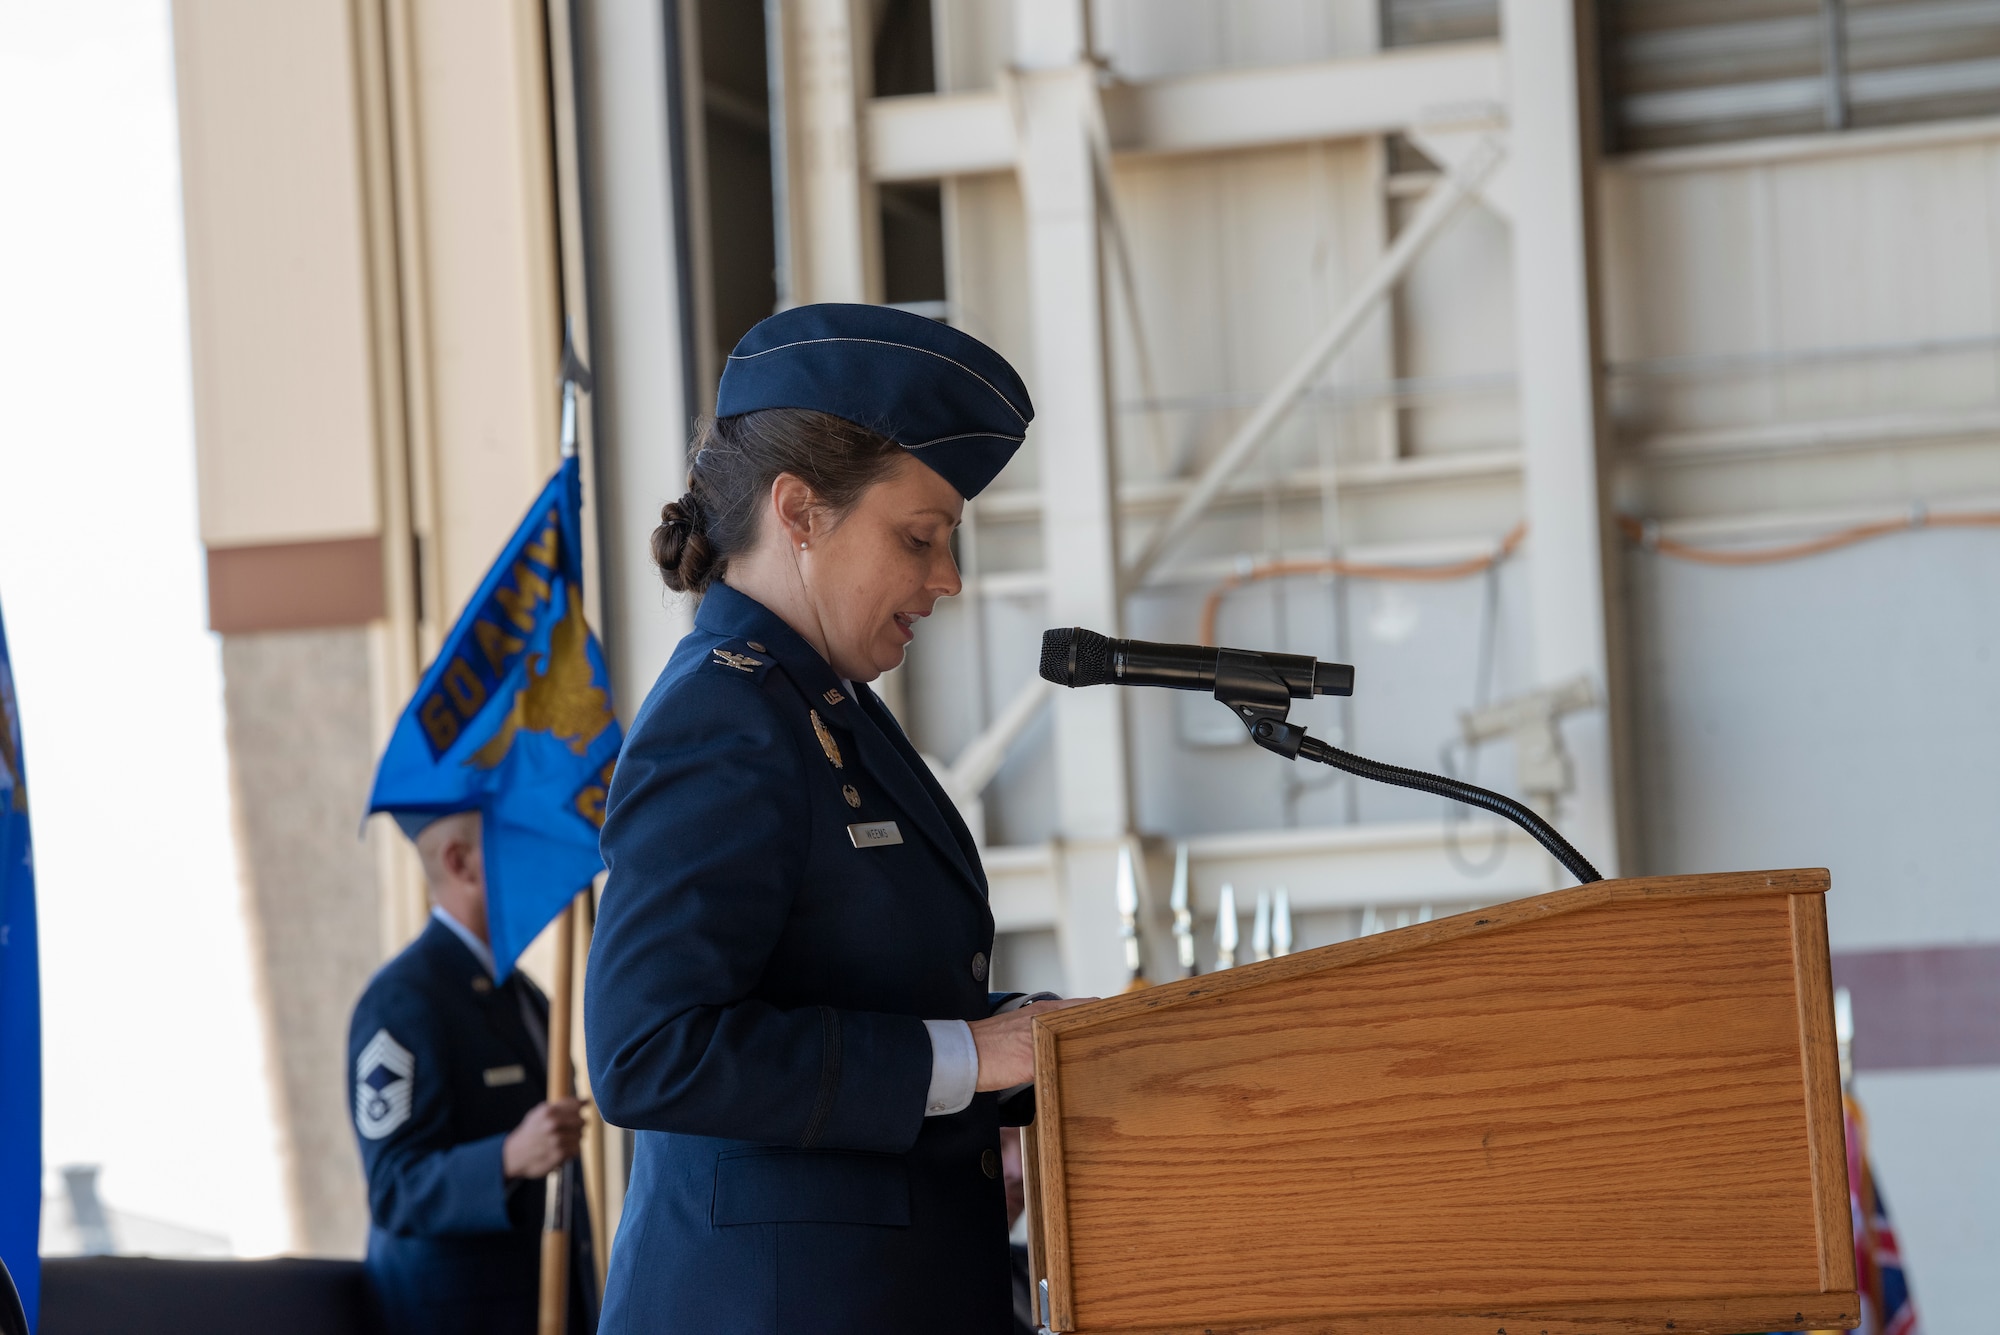 U.S. Air Force Col. Theresa Weems, outgoing 60th Operations Group commander, delivers a speech during the 60th OG change of command ceremony July 26, 2019, at Travis Air Force Base, California. After giving her speech, Weems transferred command to Col. Gregg Johnson. (U.S. Air Force photo by Tech. Sgt. James Hodgman)